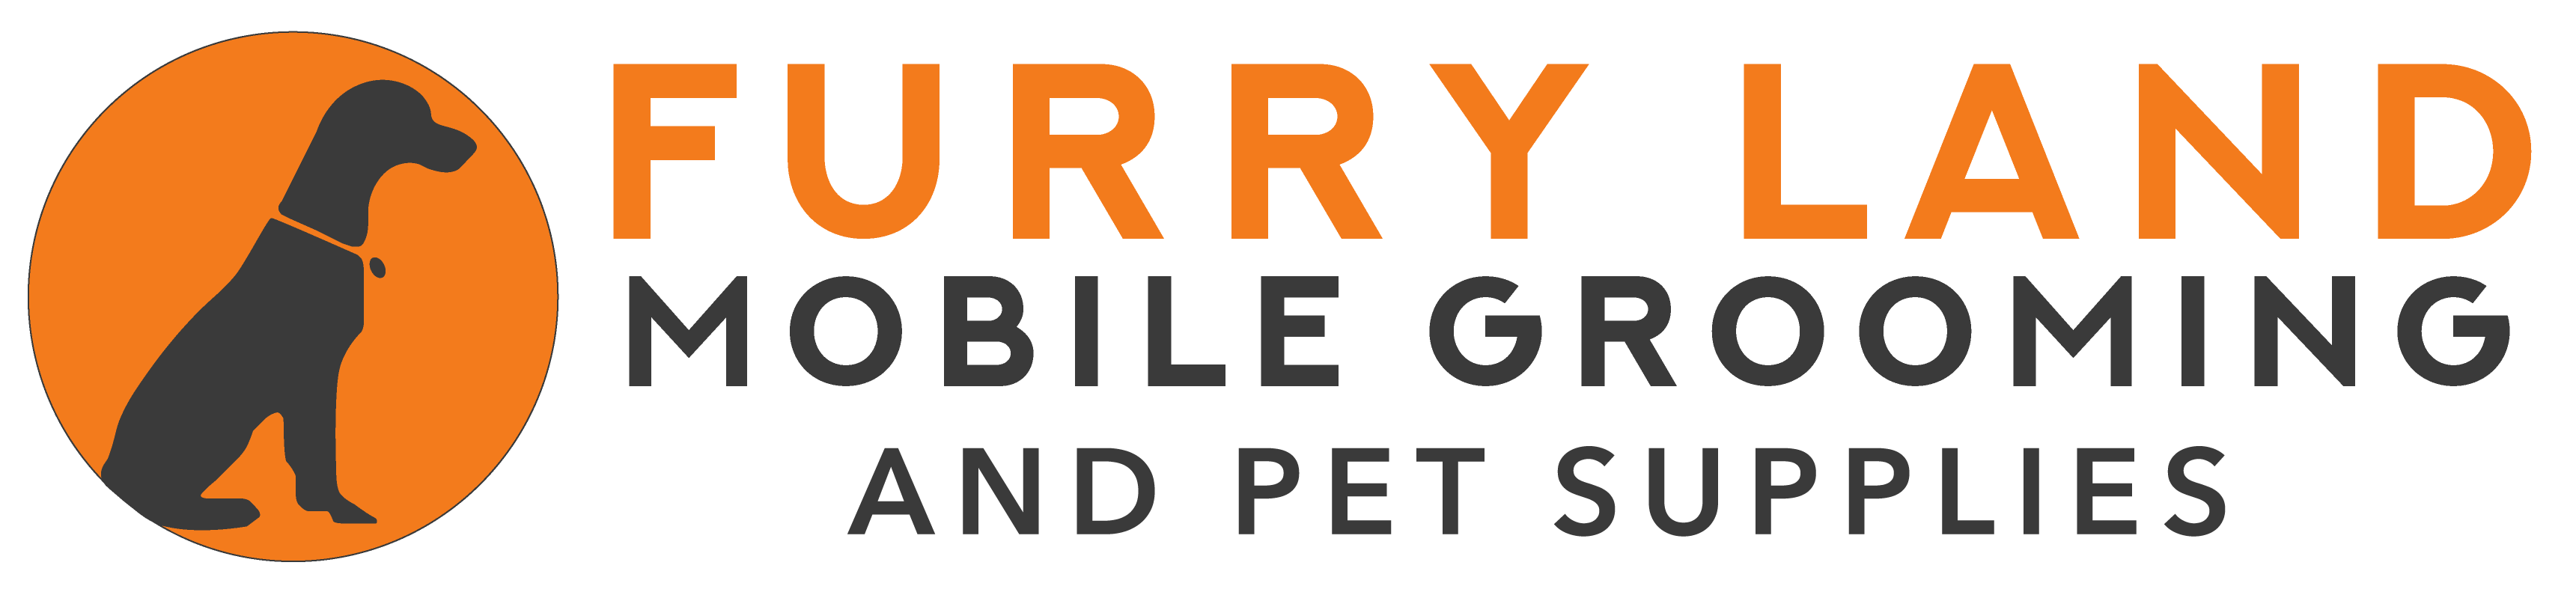 Furry Land Mobile Grooming and Pet Supplies